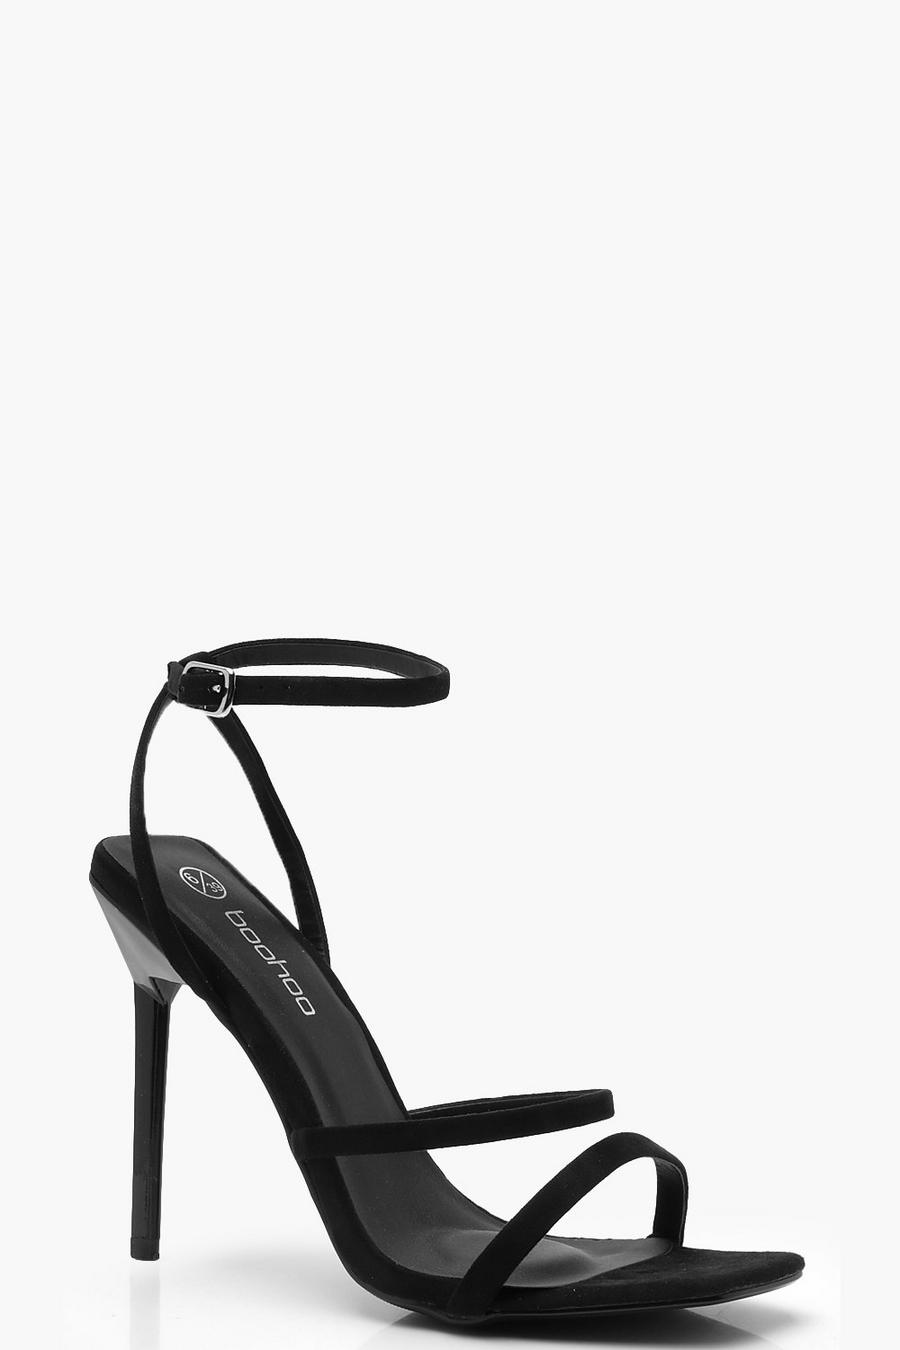 Black Square Toe Cushioned Strappy Heels image number 1